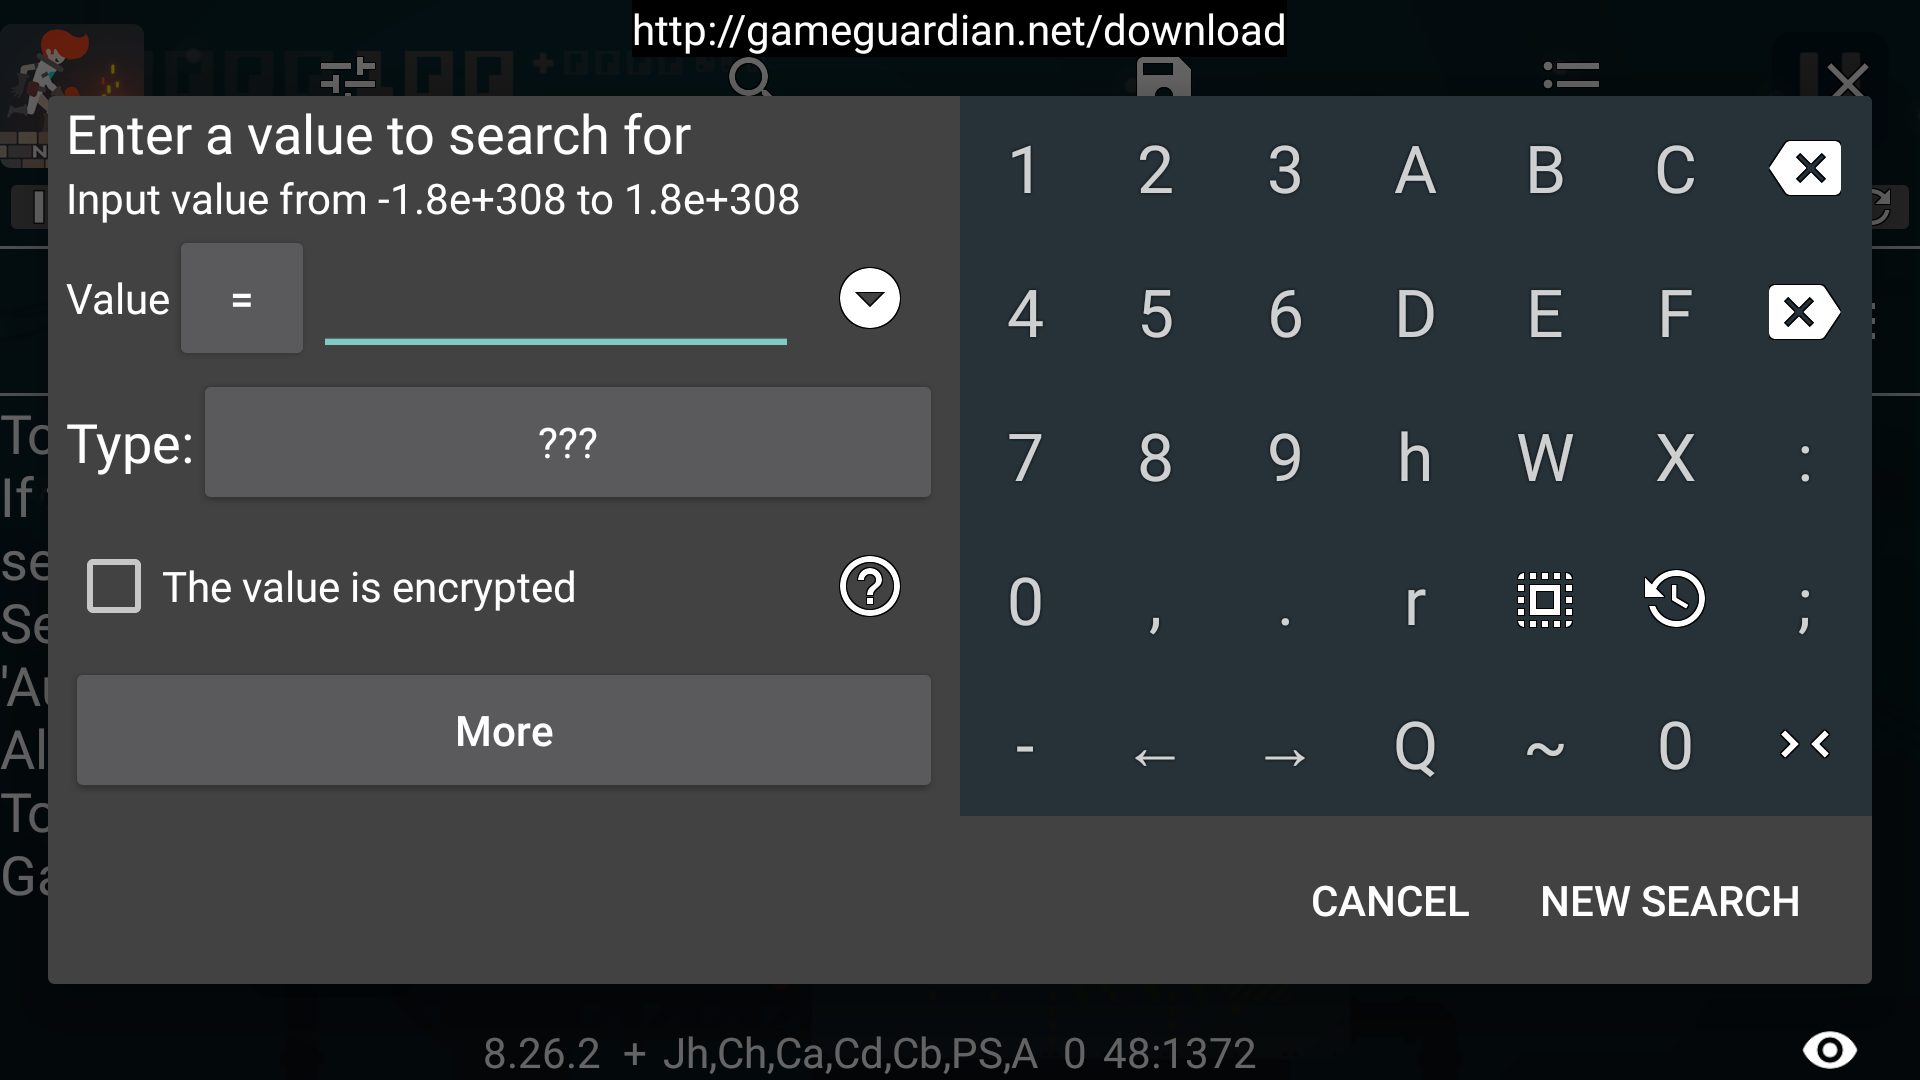 Download Game Guardian 99 0 For Android